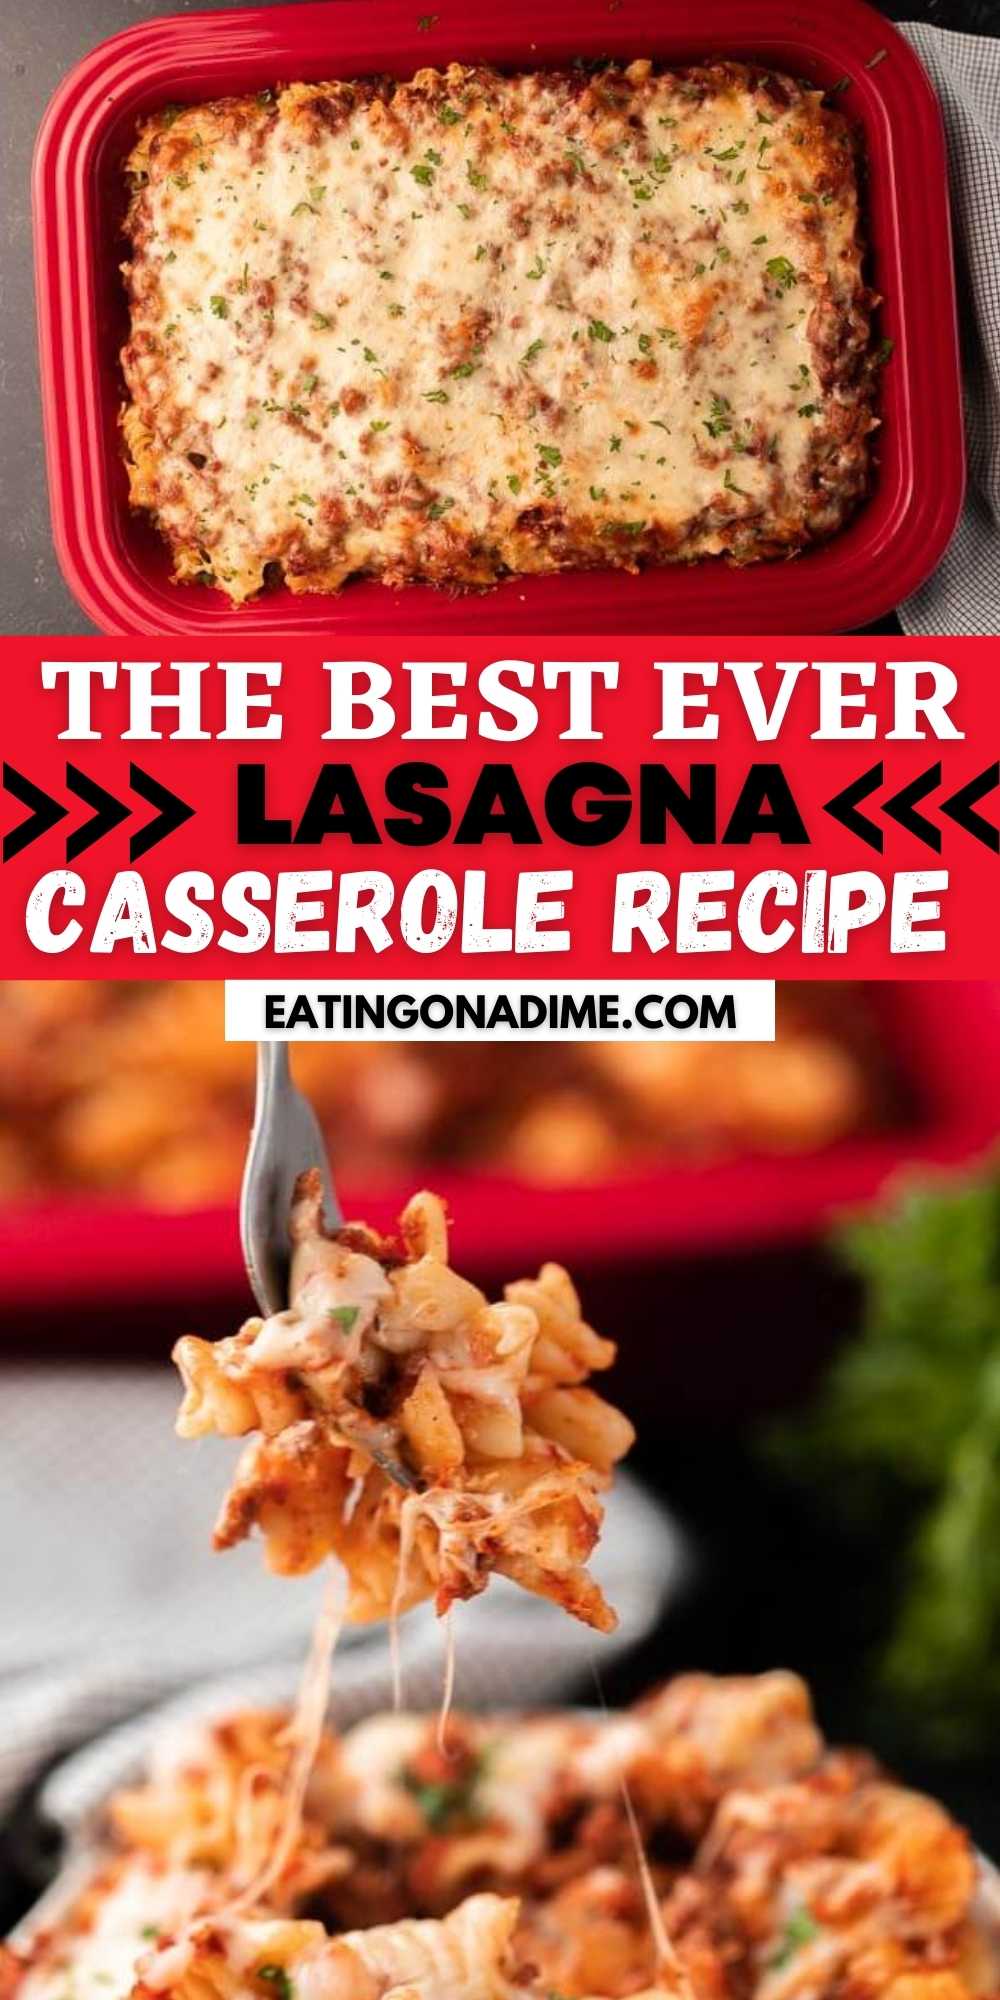 This lasagna casserole is the easiest way to get all the flavor of a traditional lasagna without all the work! The entire family will love this easy lasagna casserole recipe with ricotta cheese!  This recipe is great to feed a crowd as well!  #eatingonadime #casserolerecipes #lasagnarecipes 
